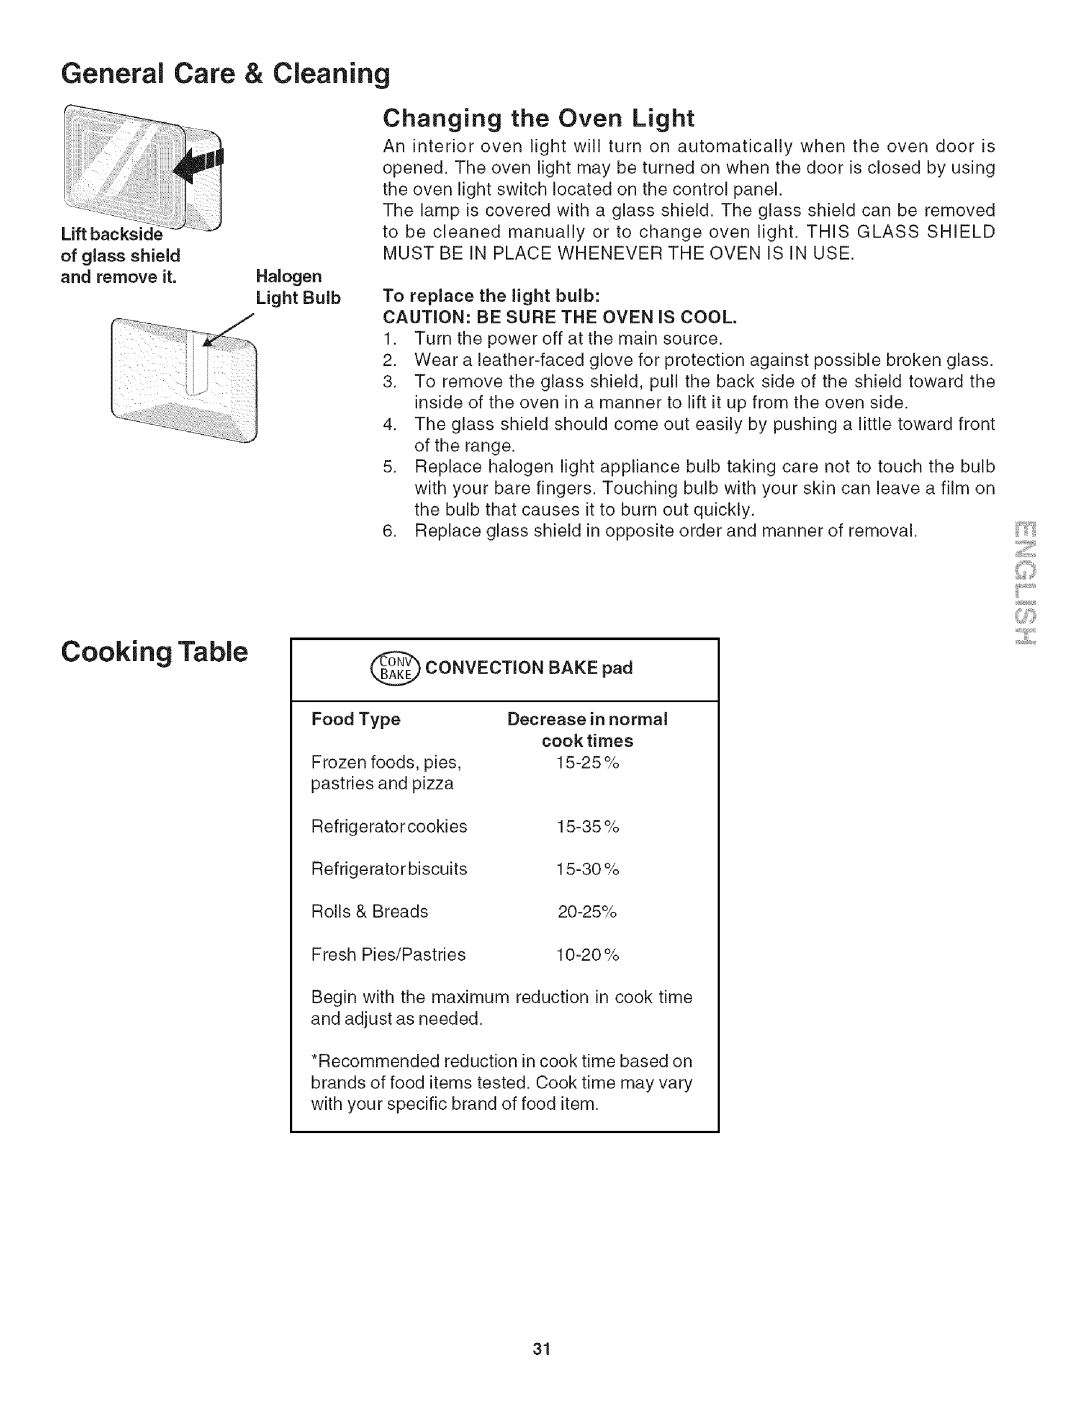 Kenmore 790.4906 manual Cooking Table, General Care & Cleaning, Changing the Oven Light 